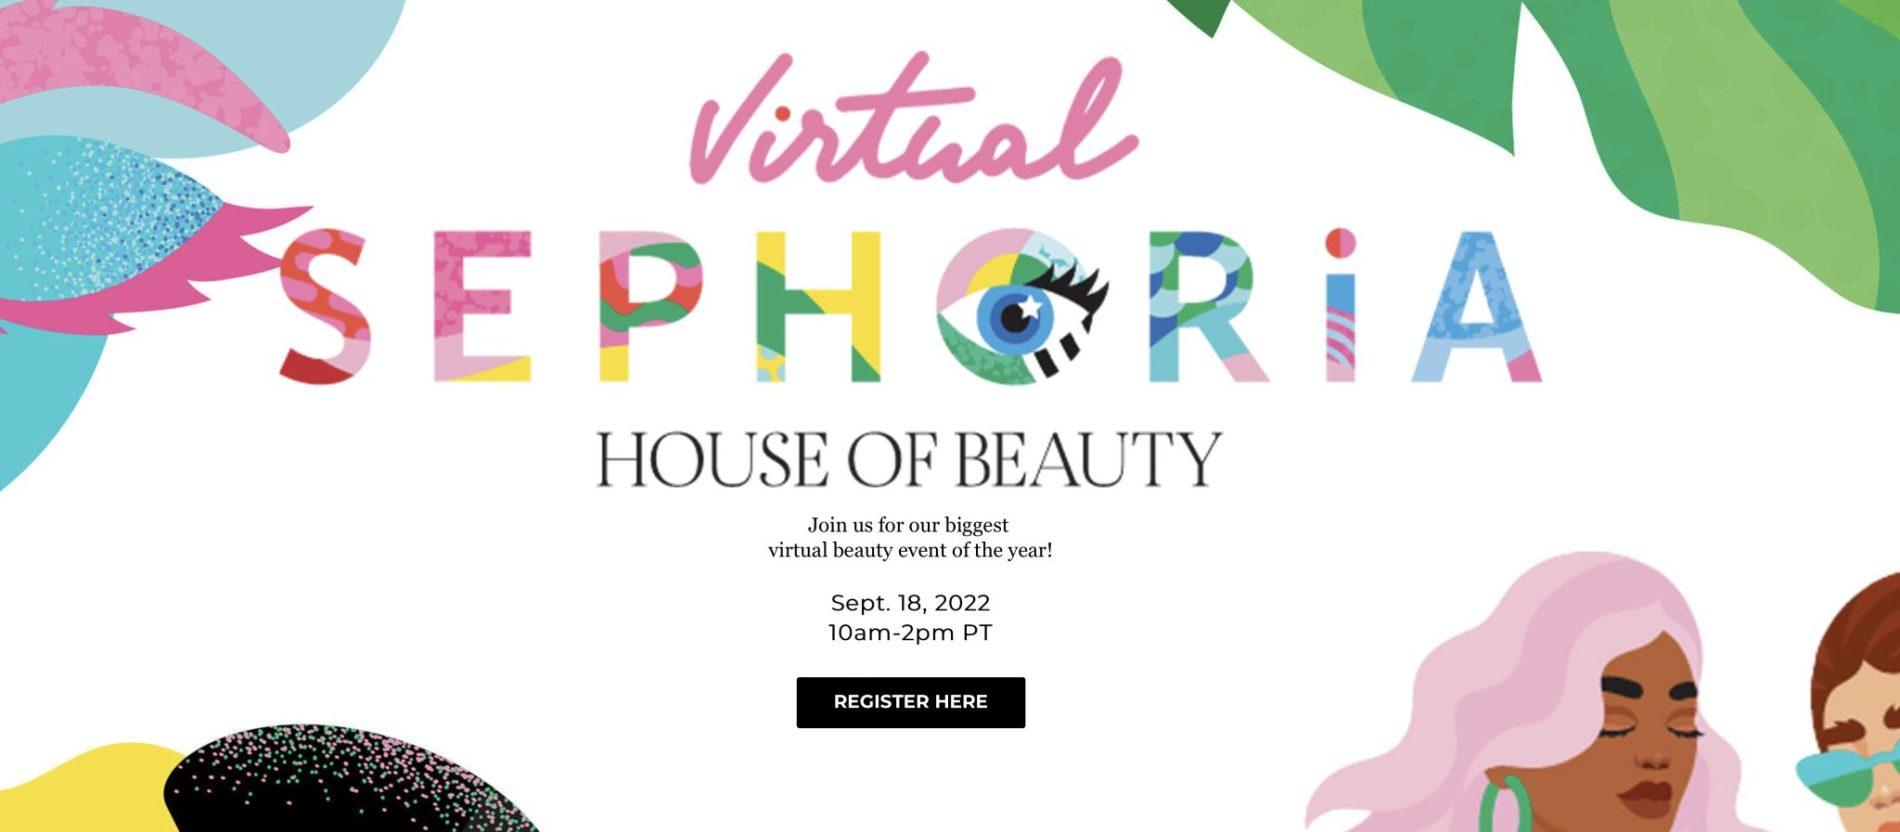 Sephoria House of Beauty – Sephora Virtual Beauty Event of the Year